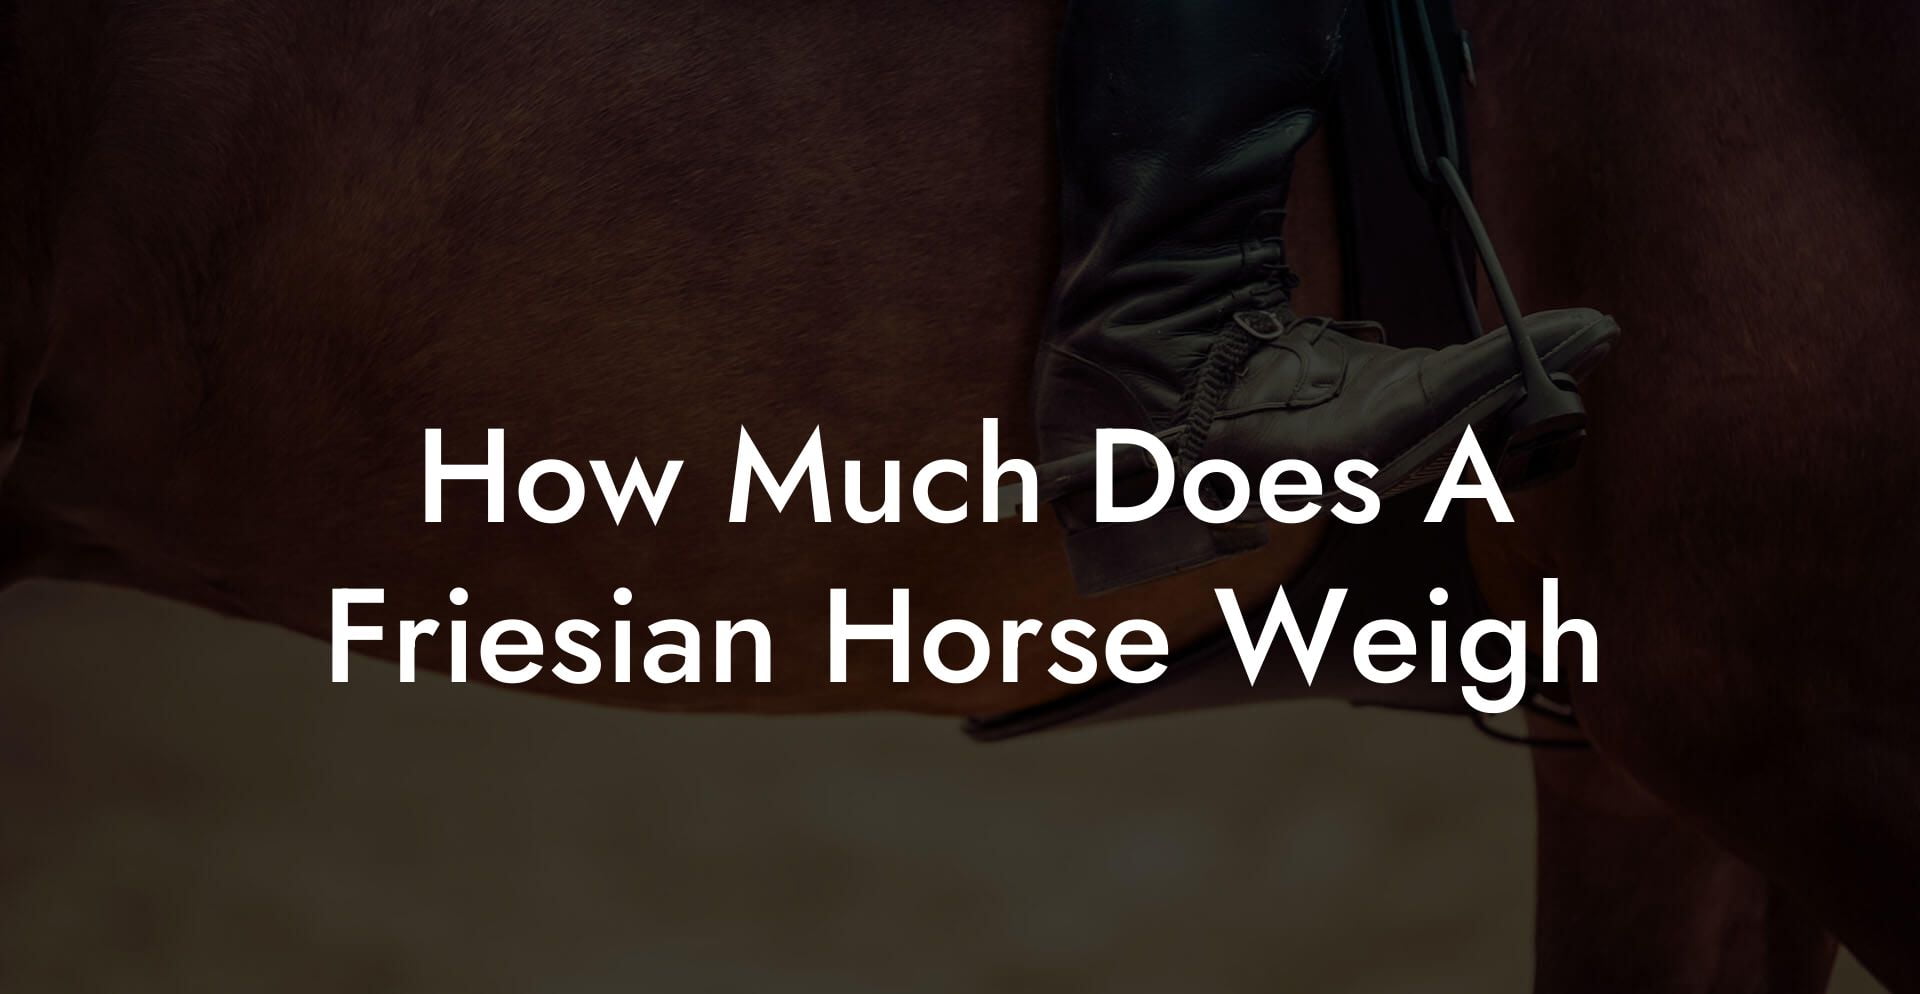 How Much Does A Friesian Horse Weigh